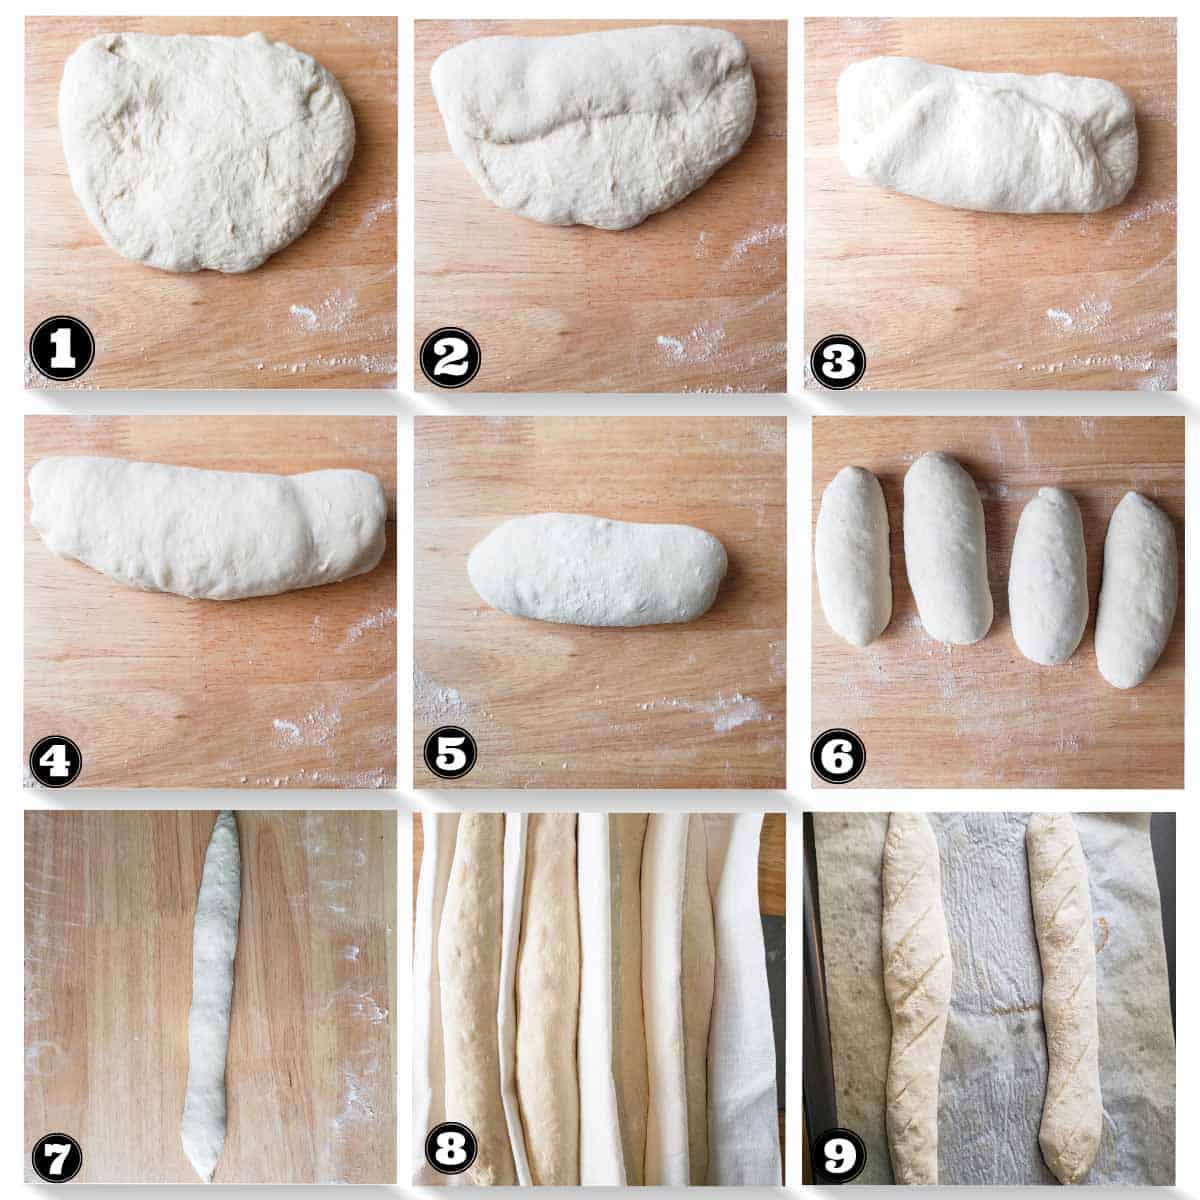 recipe images showing steps of shaping the sourdough baguette